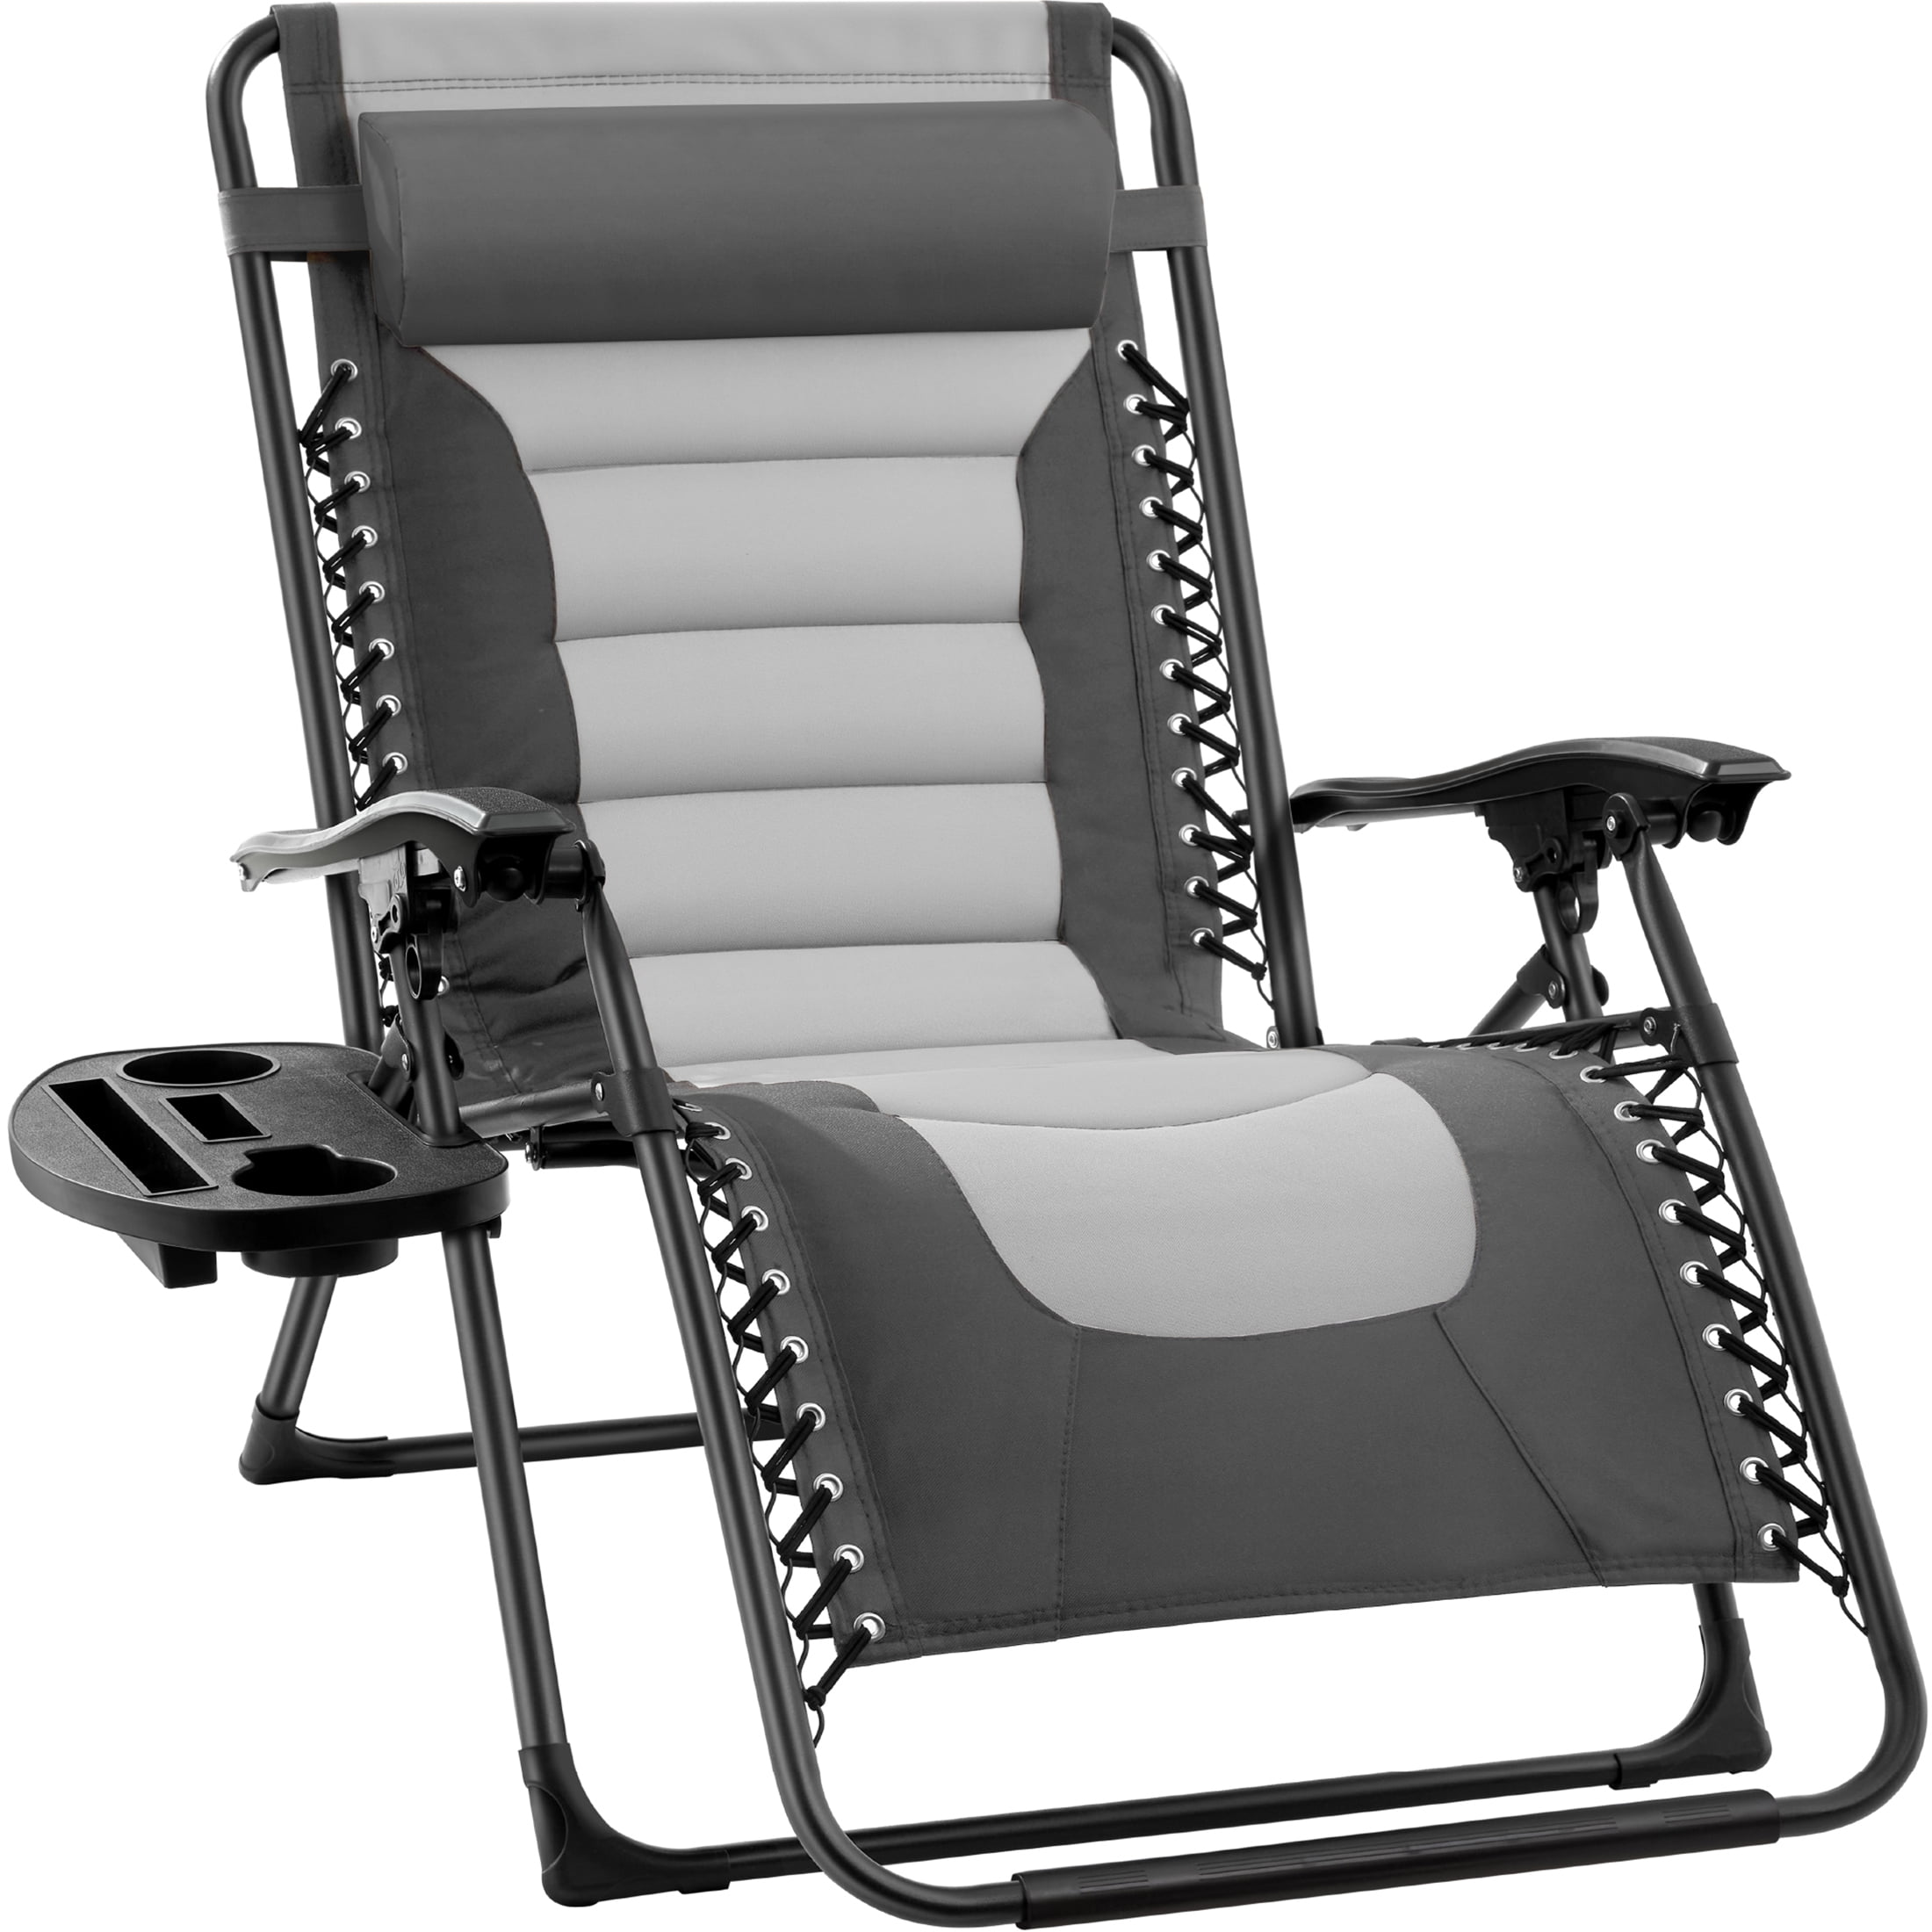 Best Choice Products Oversized Zero Gravity Chair, Folding Recliner w/ Removable Cushion, Side Tray - Woodland Brown